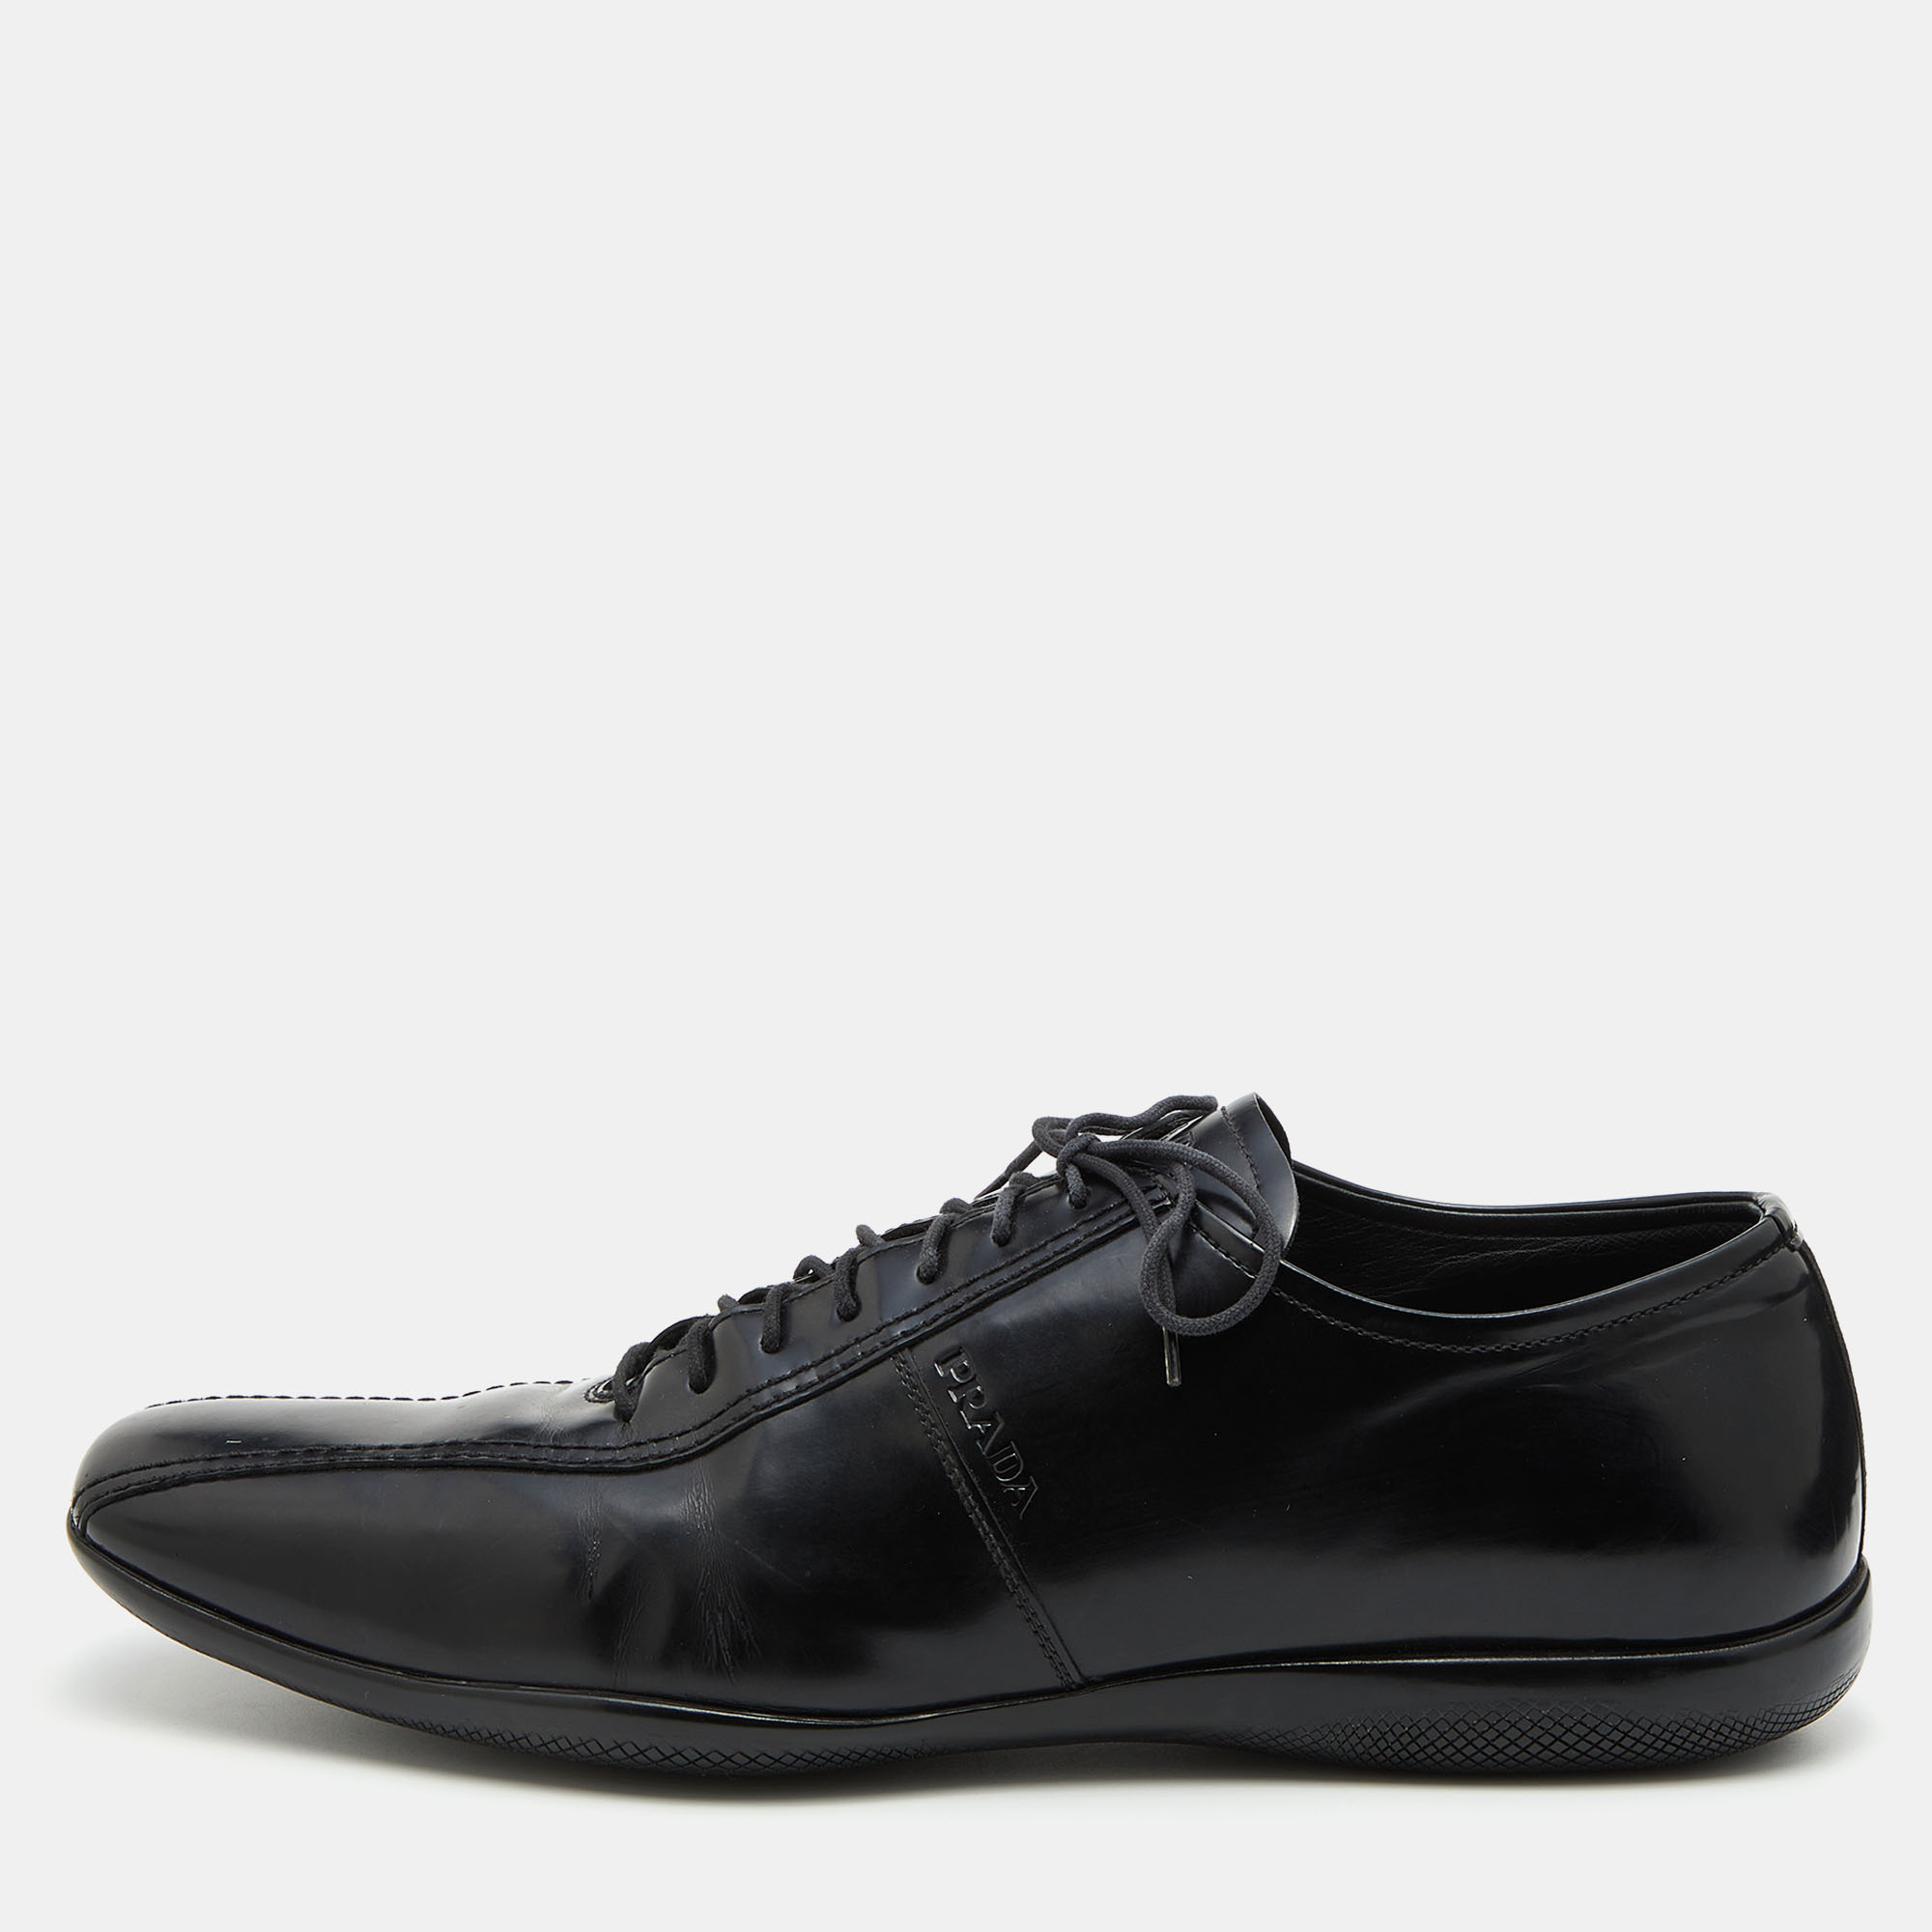 Pre-owned Prada Black Leather Lace Up Oxfords Size 45